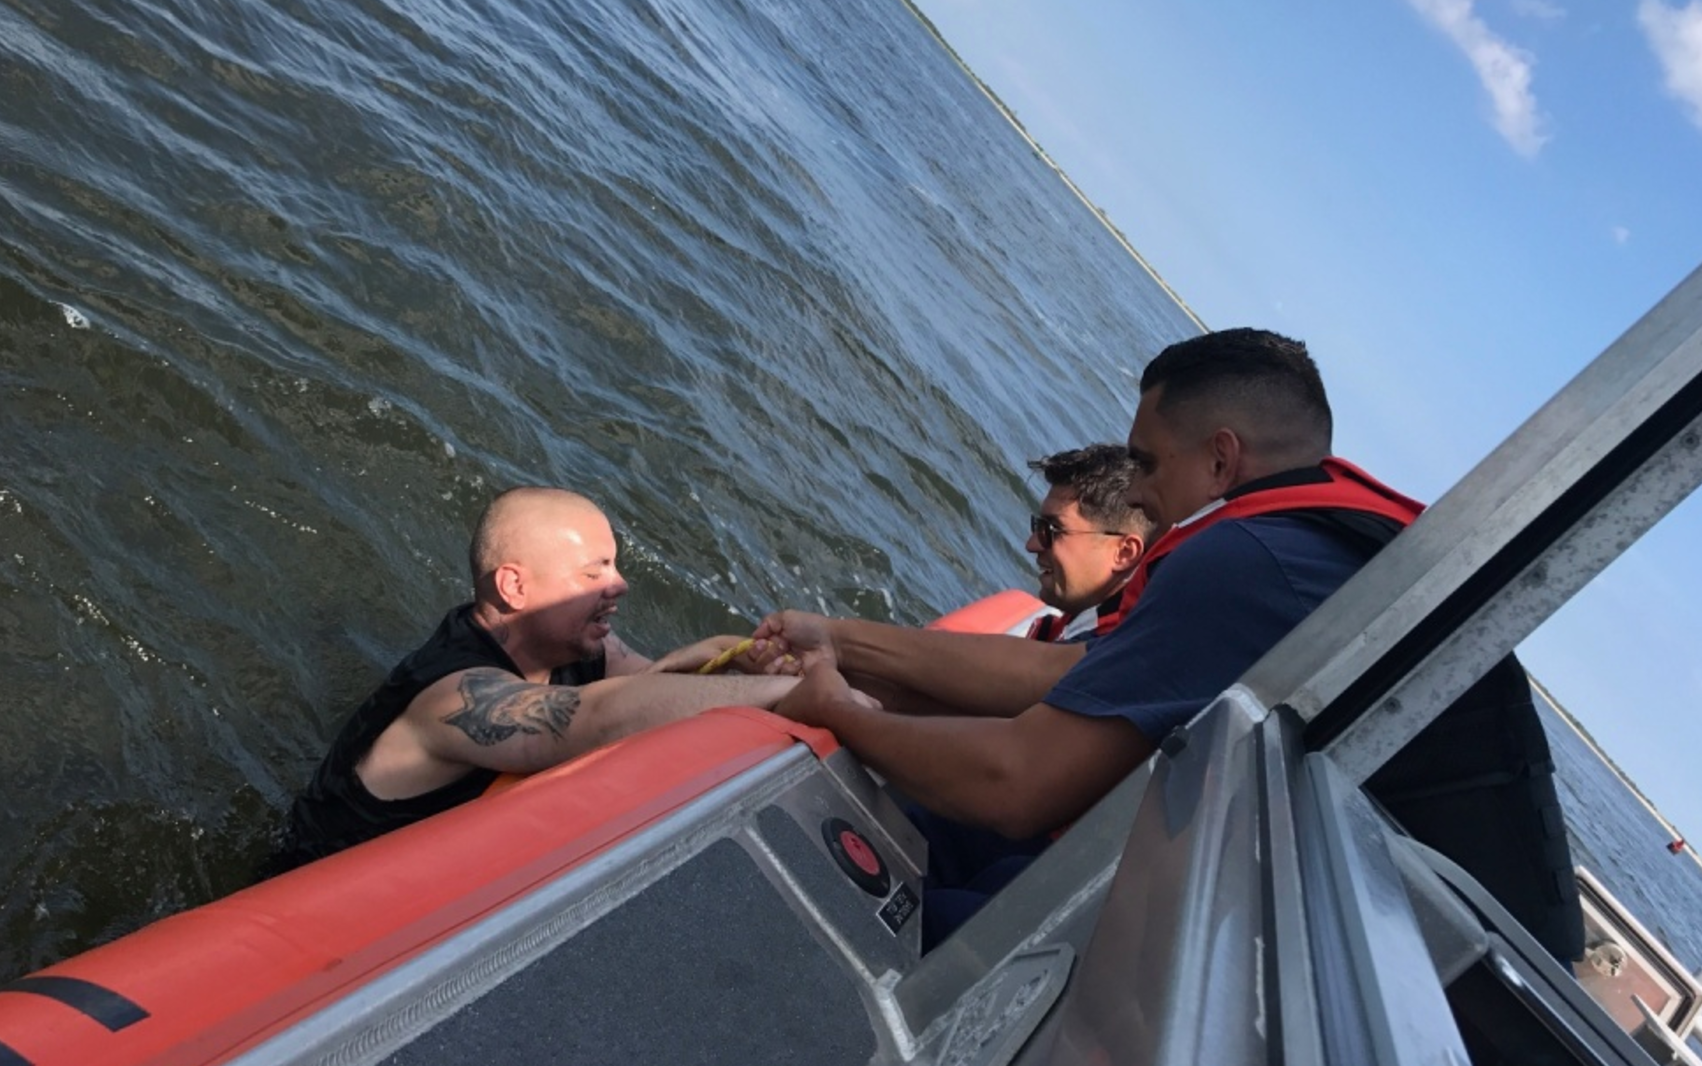 U.S. Coast Guard personnel rescuing a man from the water off Highlands Saturday afternoon. (Image: USCG)